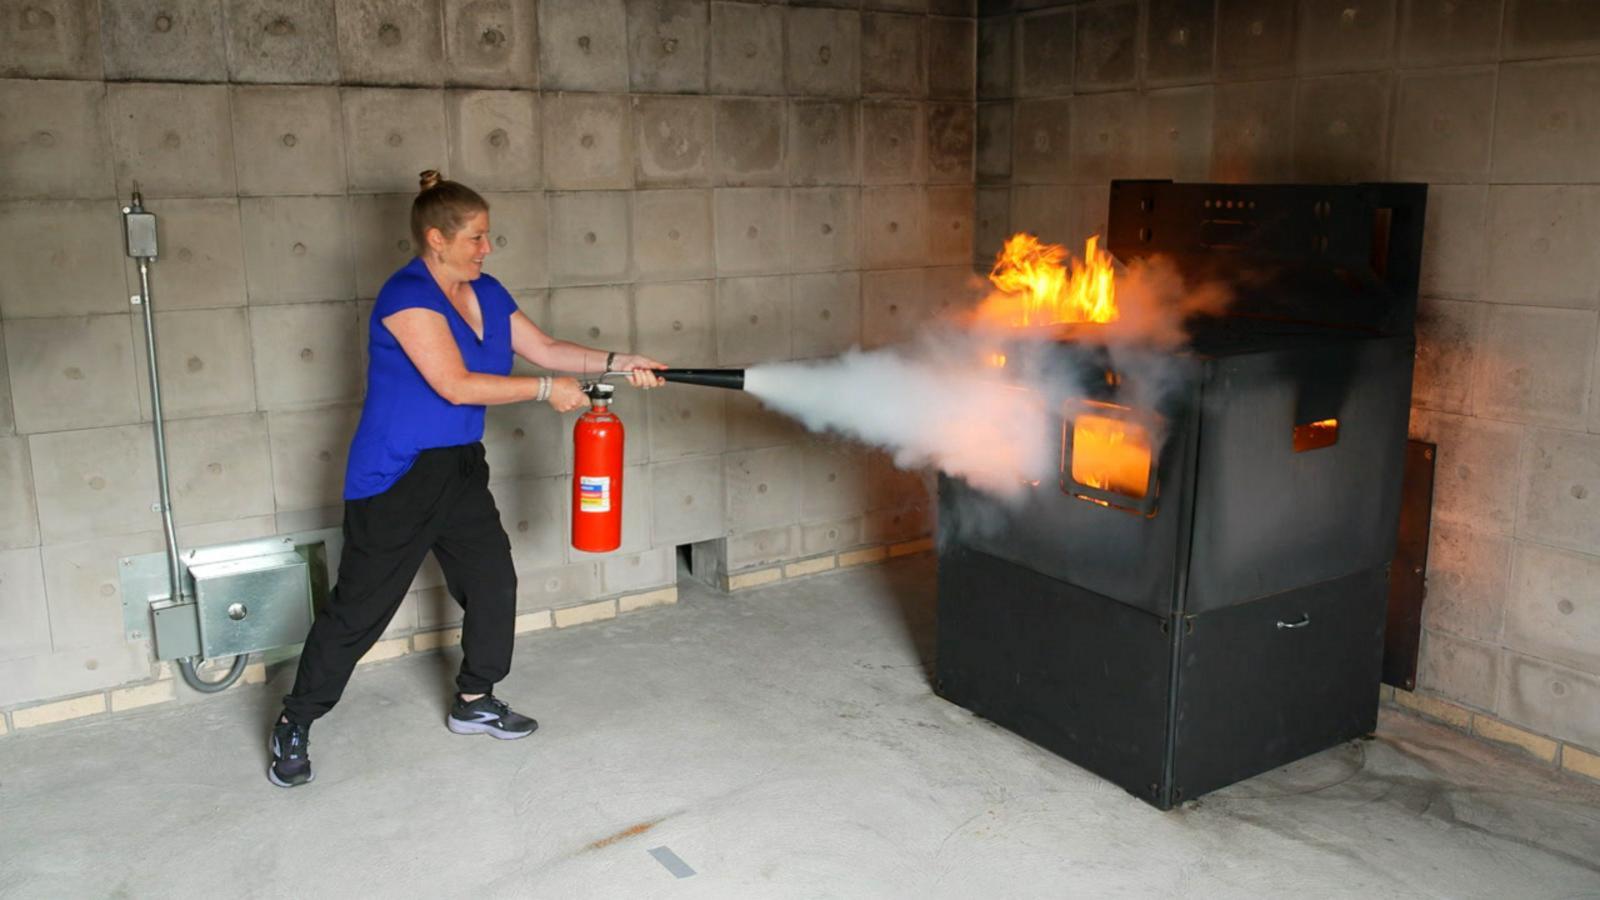 VIDEO: How to use a fire extinguisher as Thanksgiving cooking gets underway